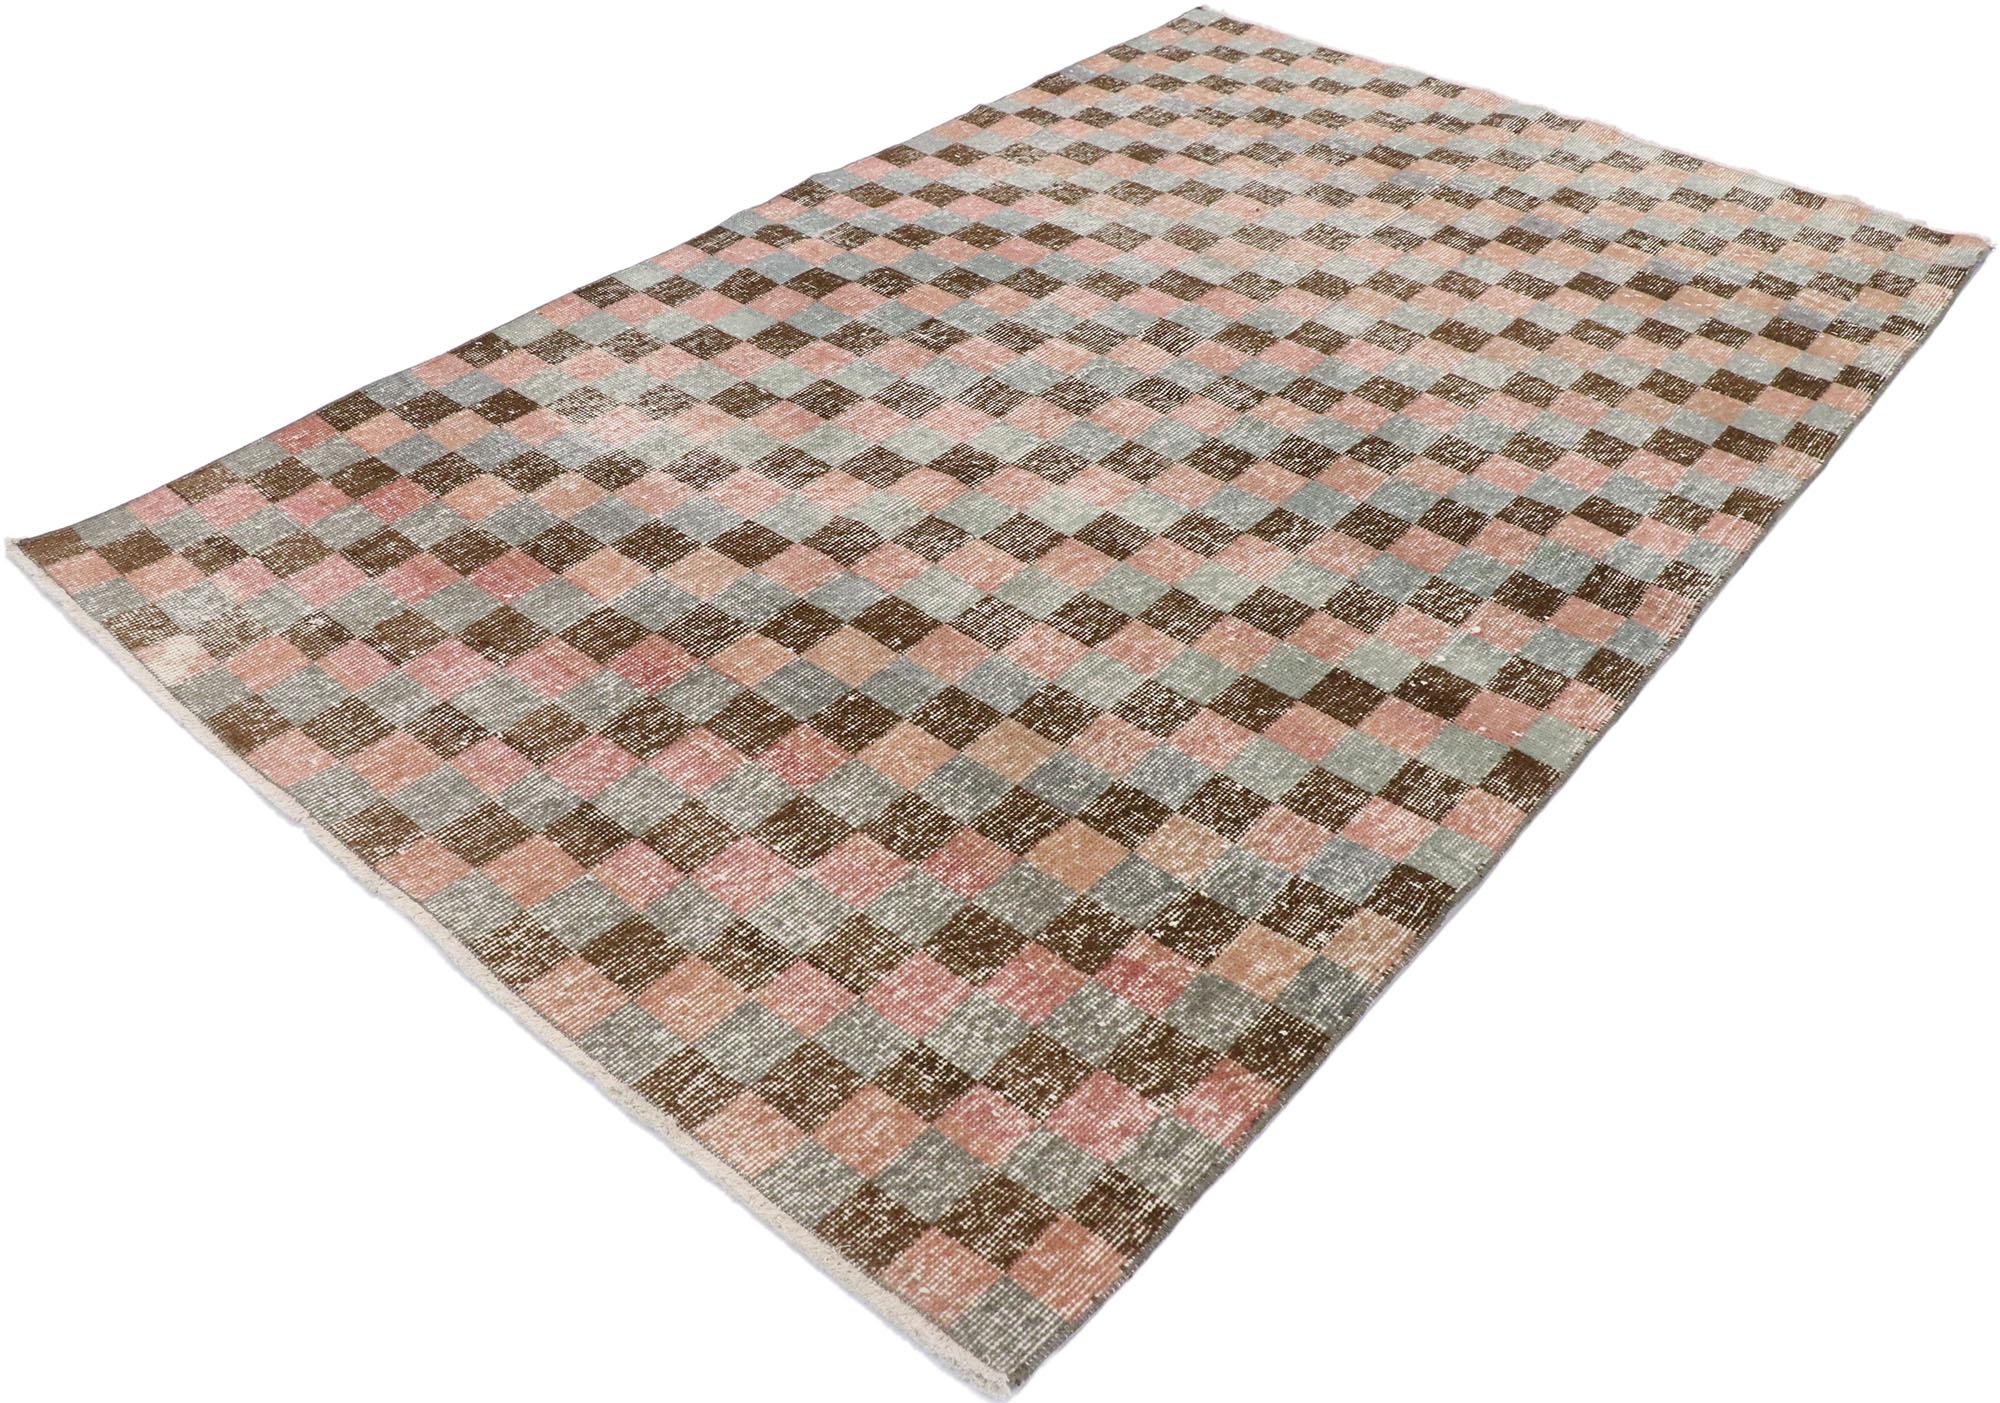 53275 distressed vintage Turkish Sivas rug with Modern Industrial Cubism style. The versatility of this rug lies in its simple, neutral checkerboard design comprised of rows of multi-colored squares and cubes. Whether running along a hallway in an